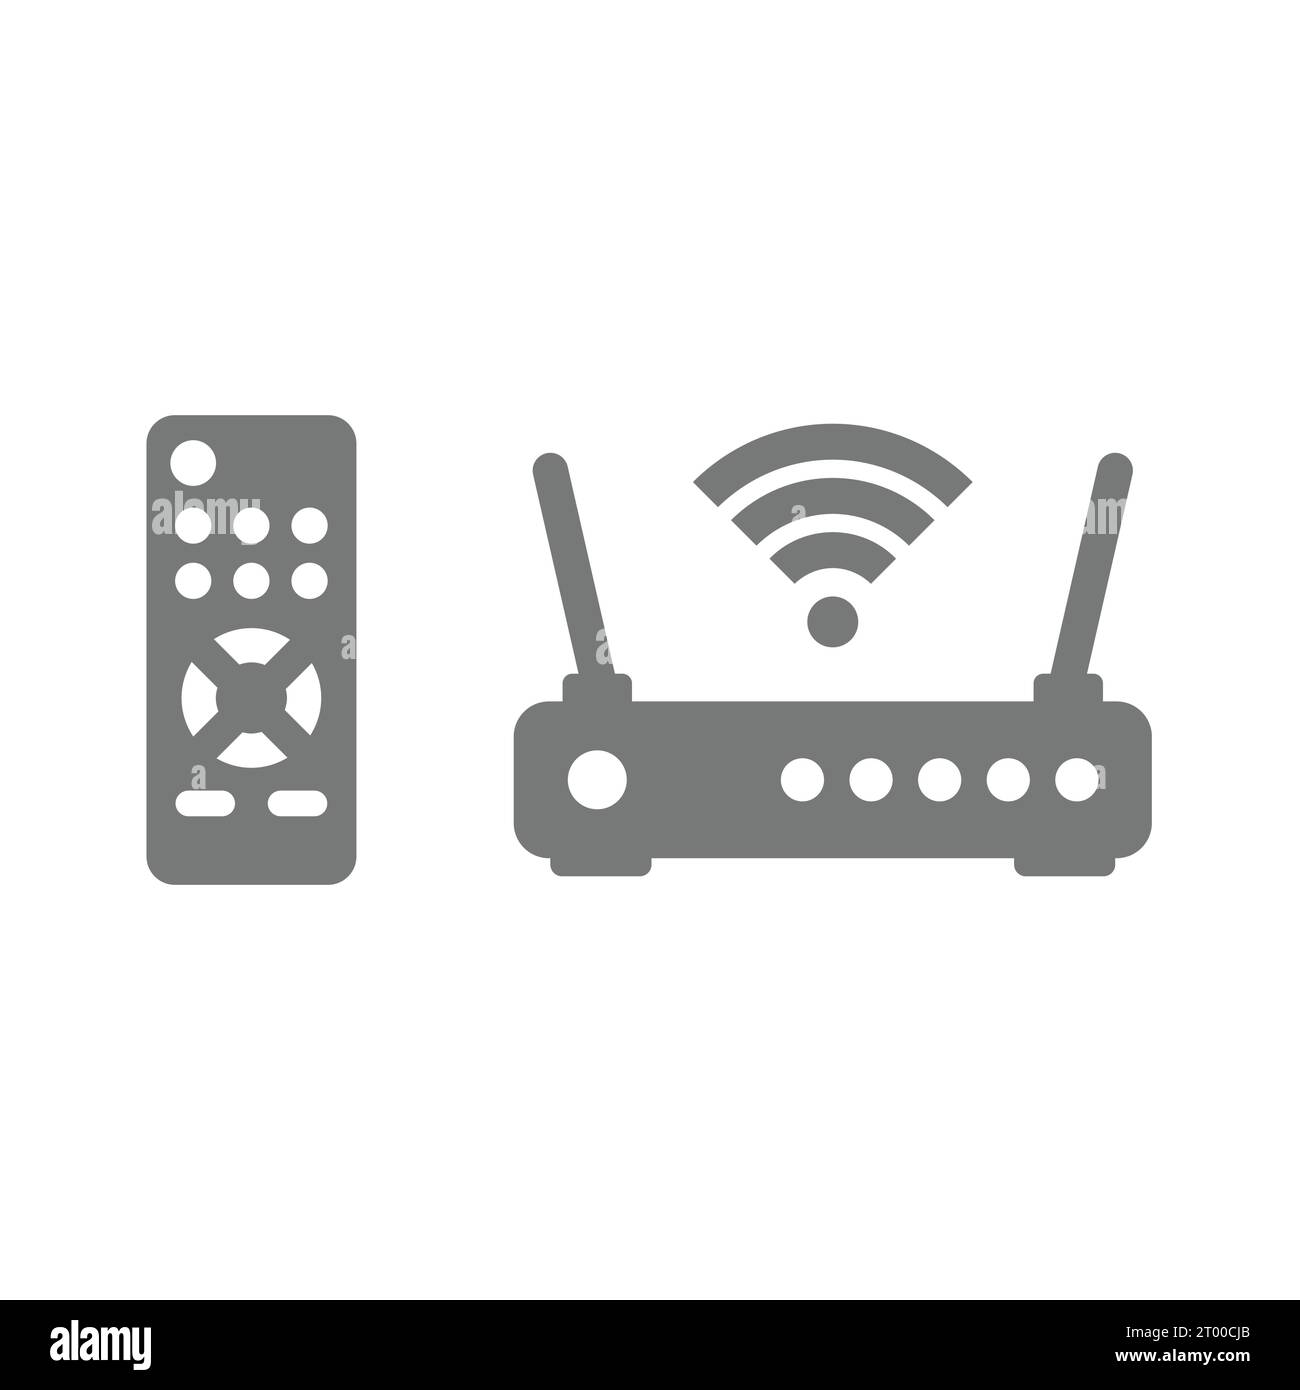 Tv and internet provider service icons. Remote control and router, wi fi, wireless connection and television icon set. Stock Vector